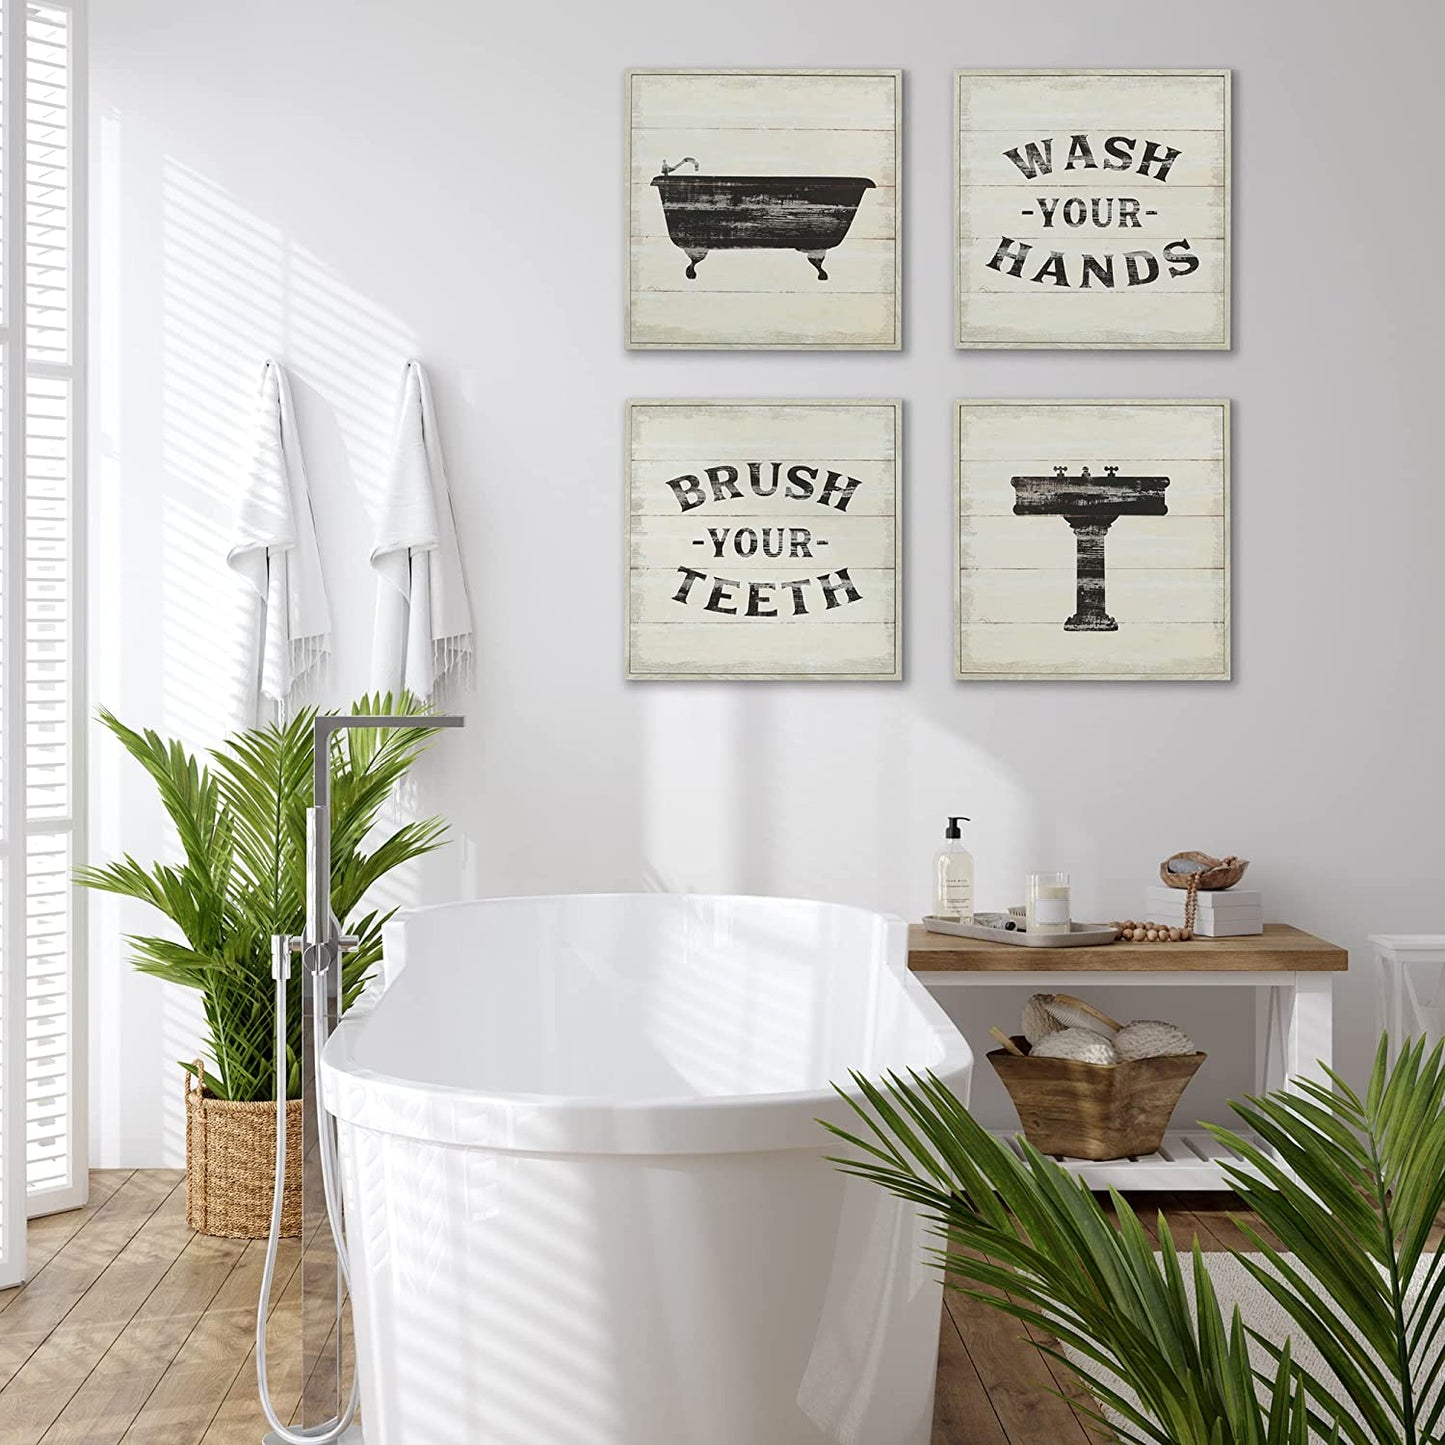 Funny Bathroom Signs 4PK - Wash Your Hands, Brush Your Teeth - 4 X Metal 10" Bathroom Signs for Wall Decor